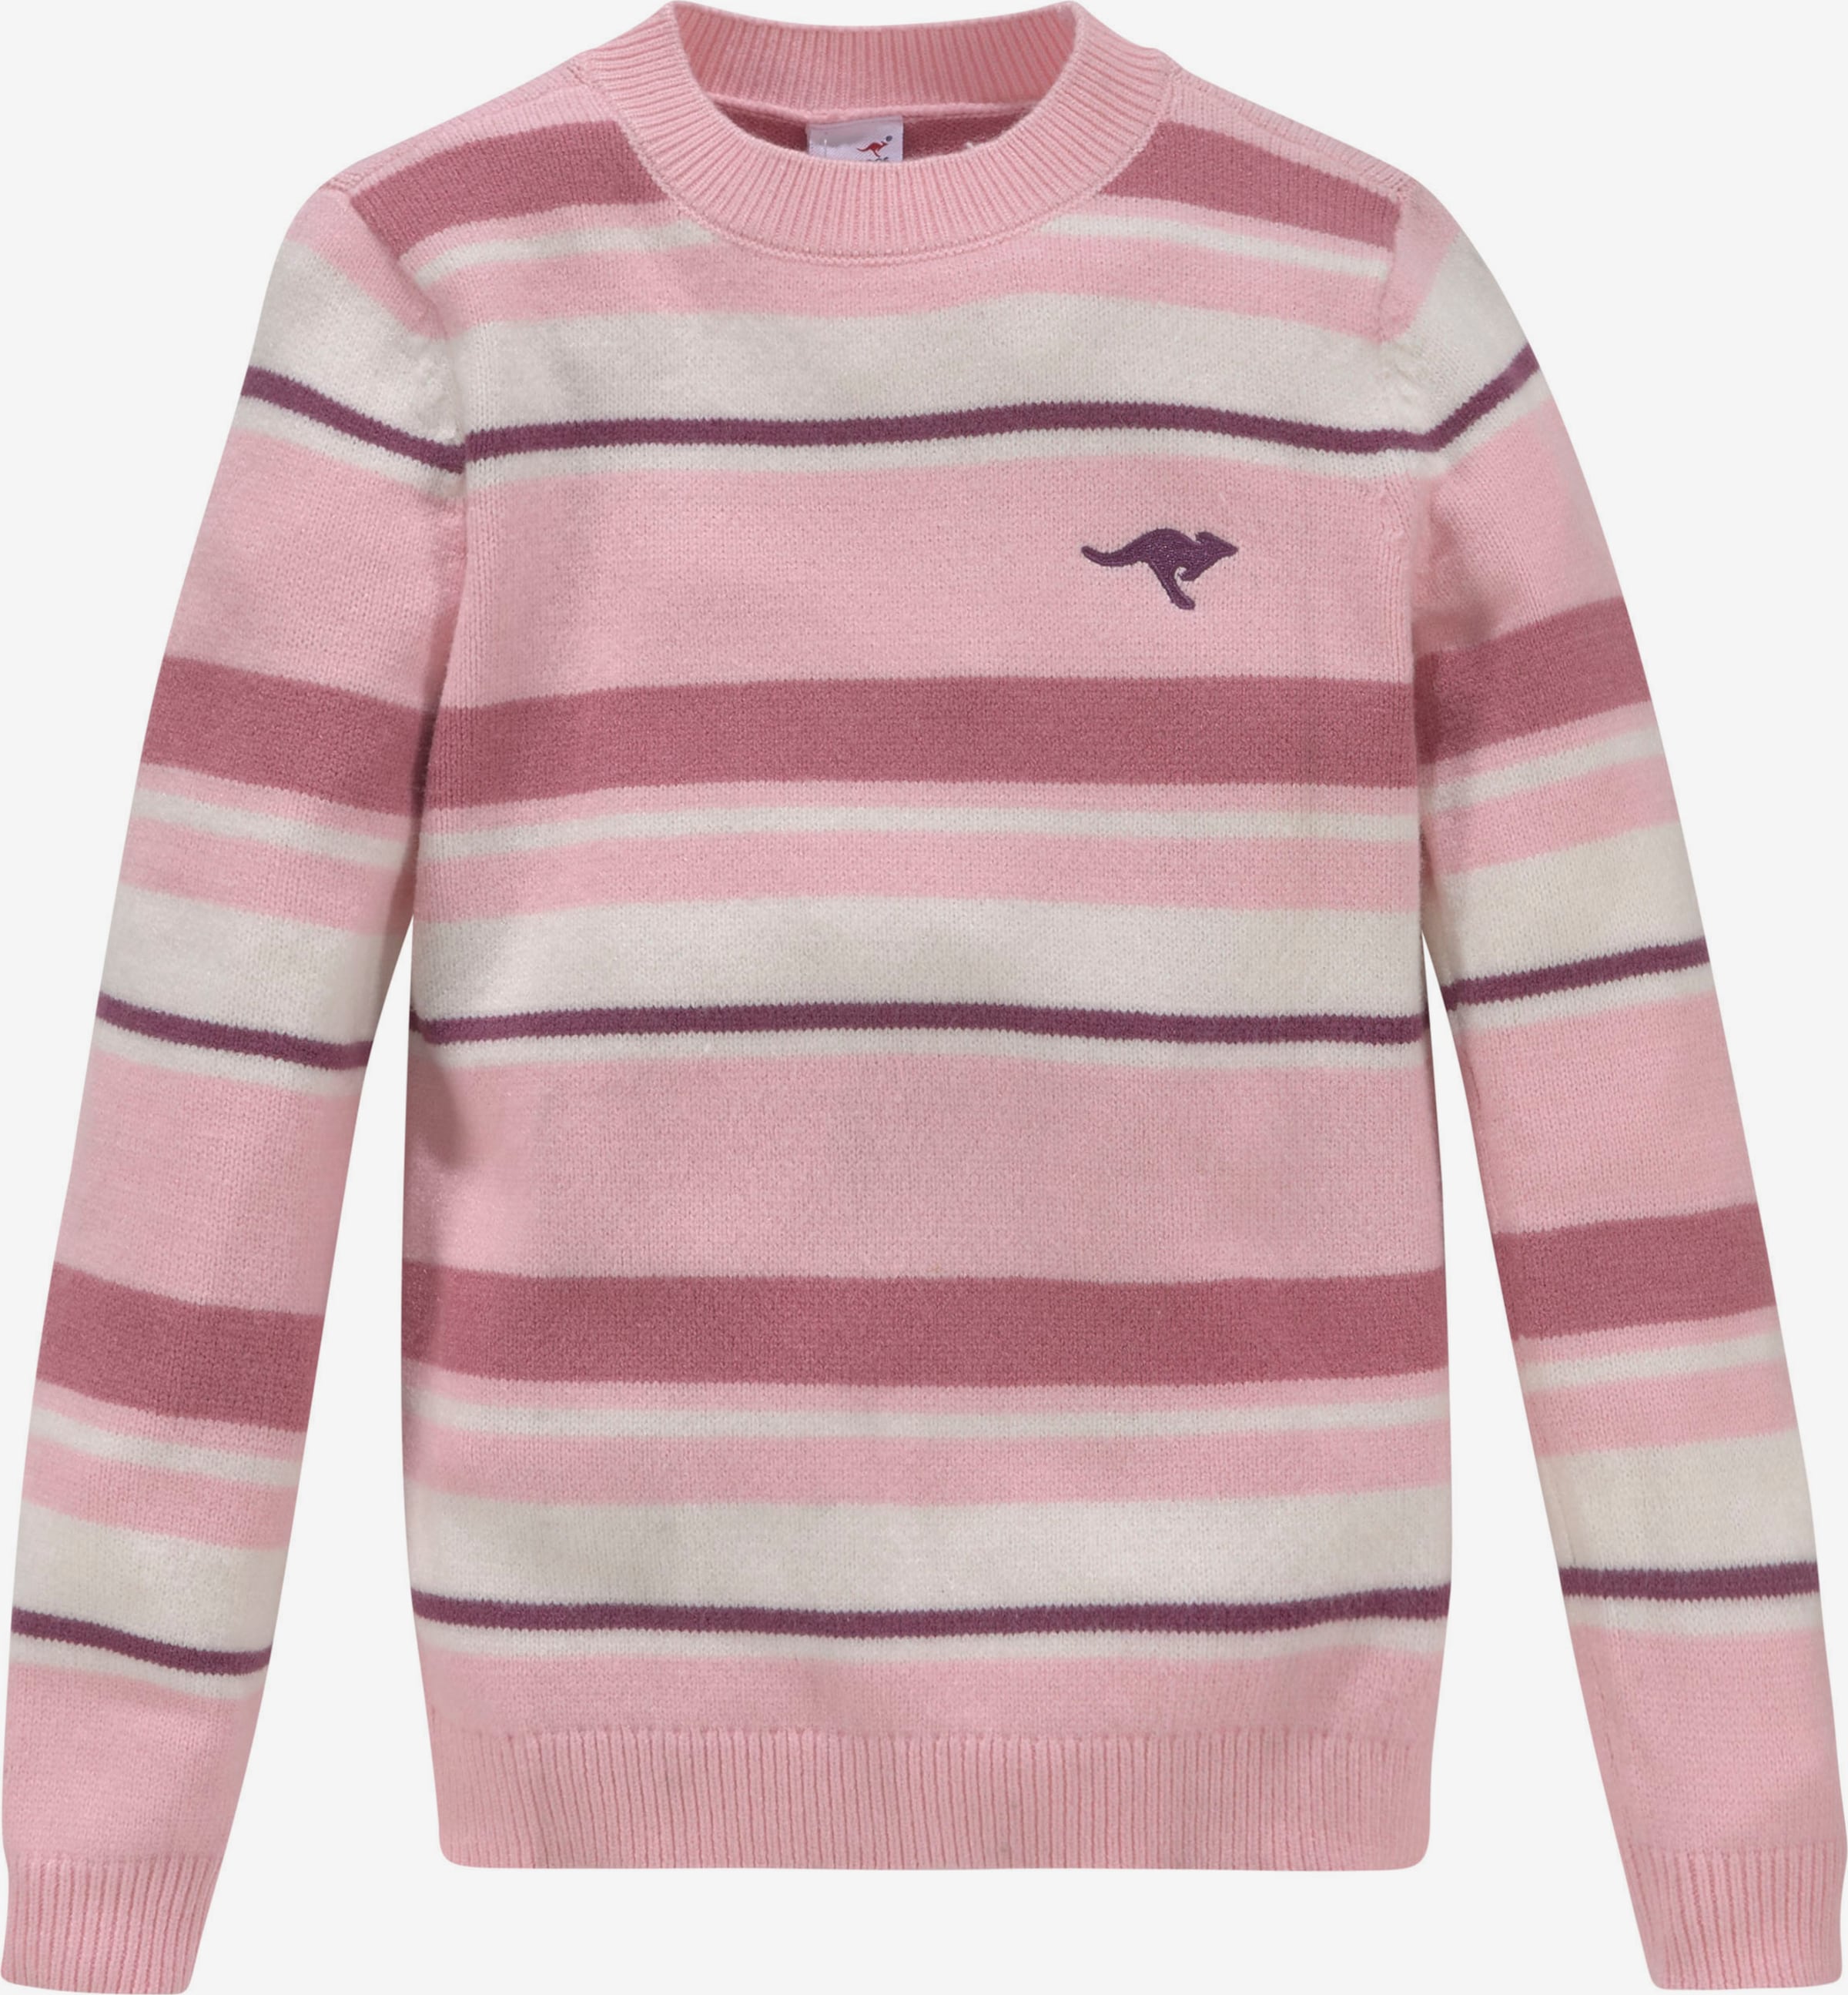 KangaROOS Pullover in Rosa, Altrosa ABOUT | YOU